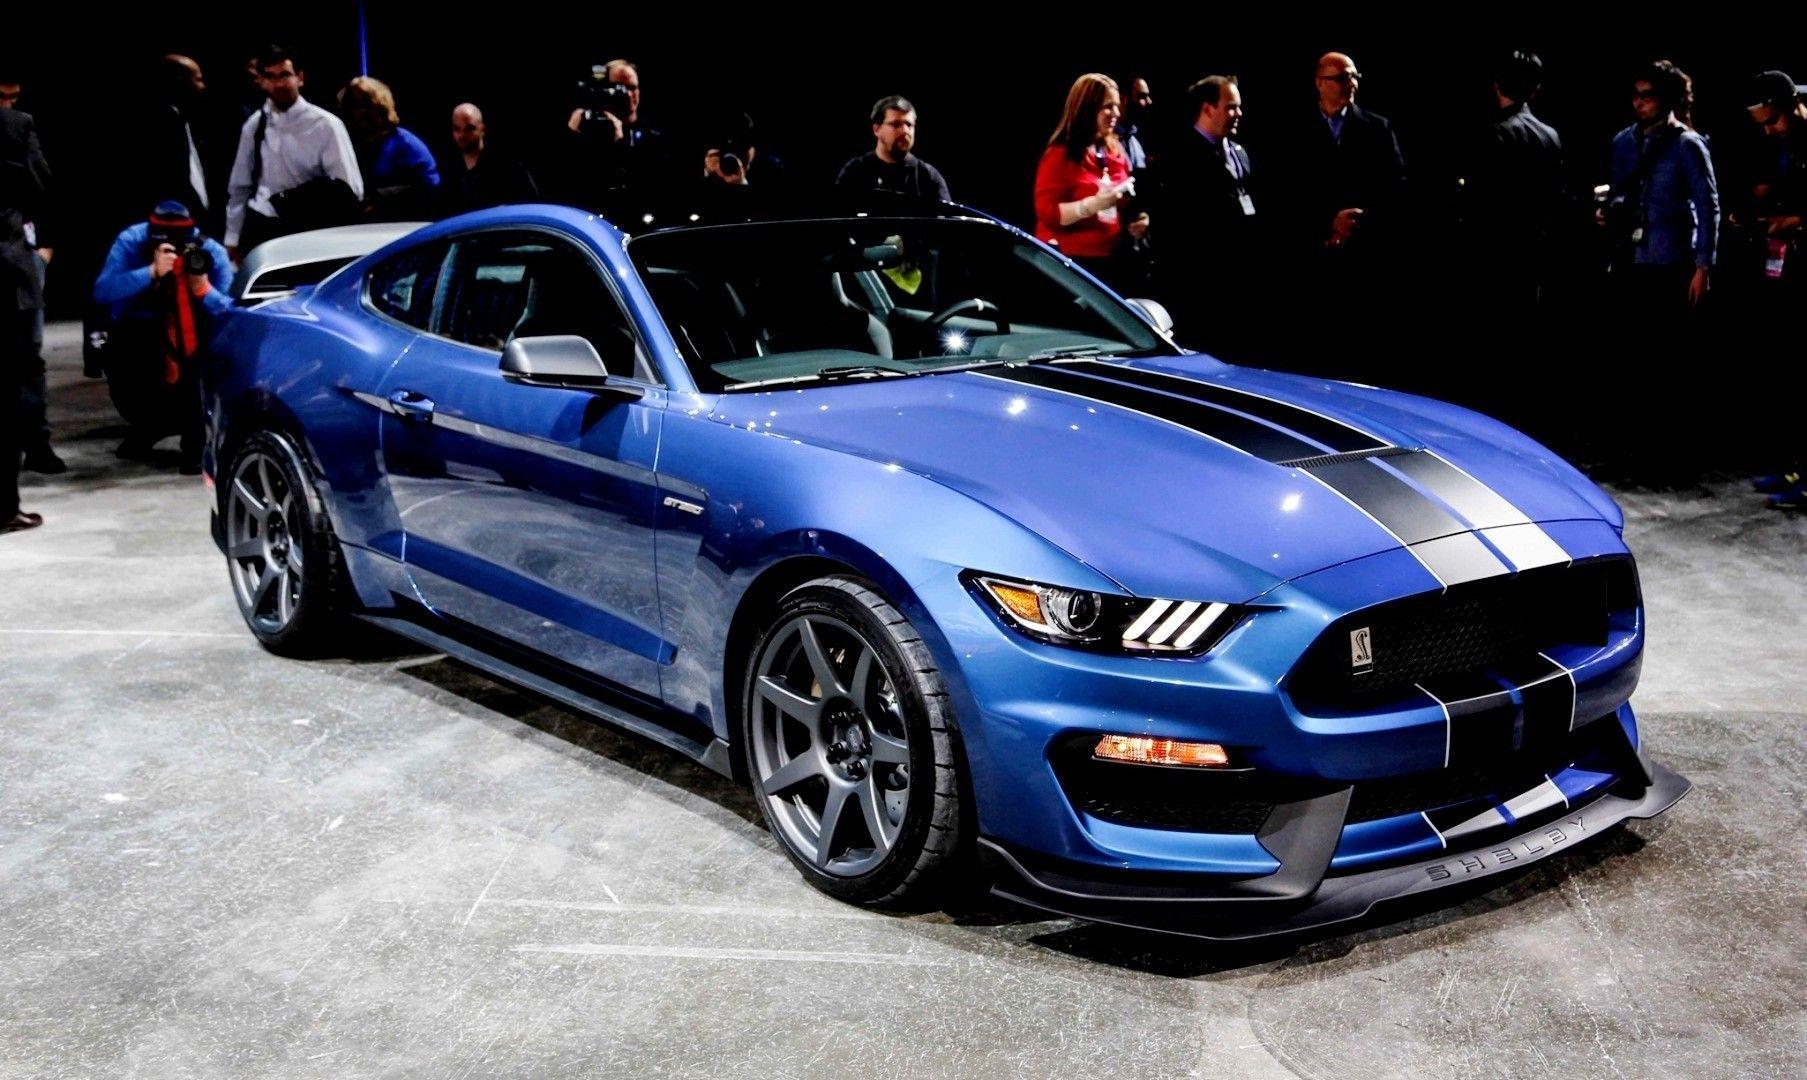 Ford Mustang Shelby GT350 2016 HD wallpaper free download